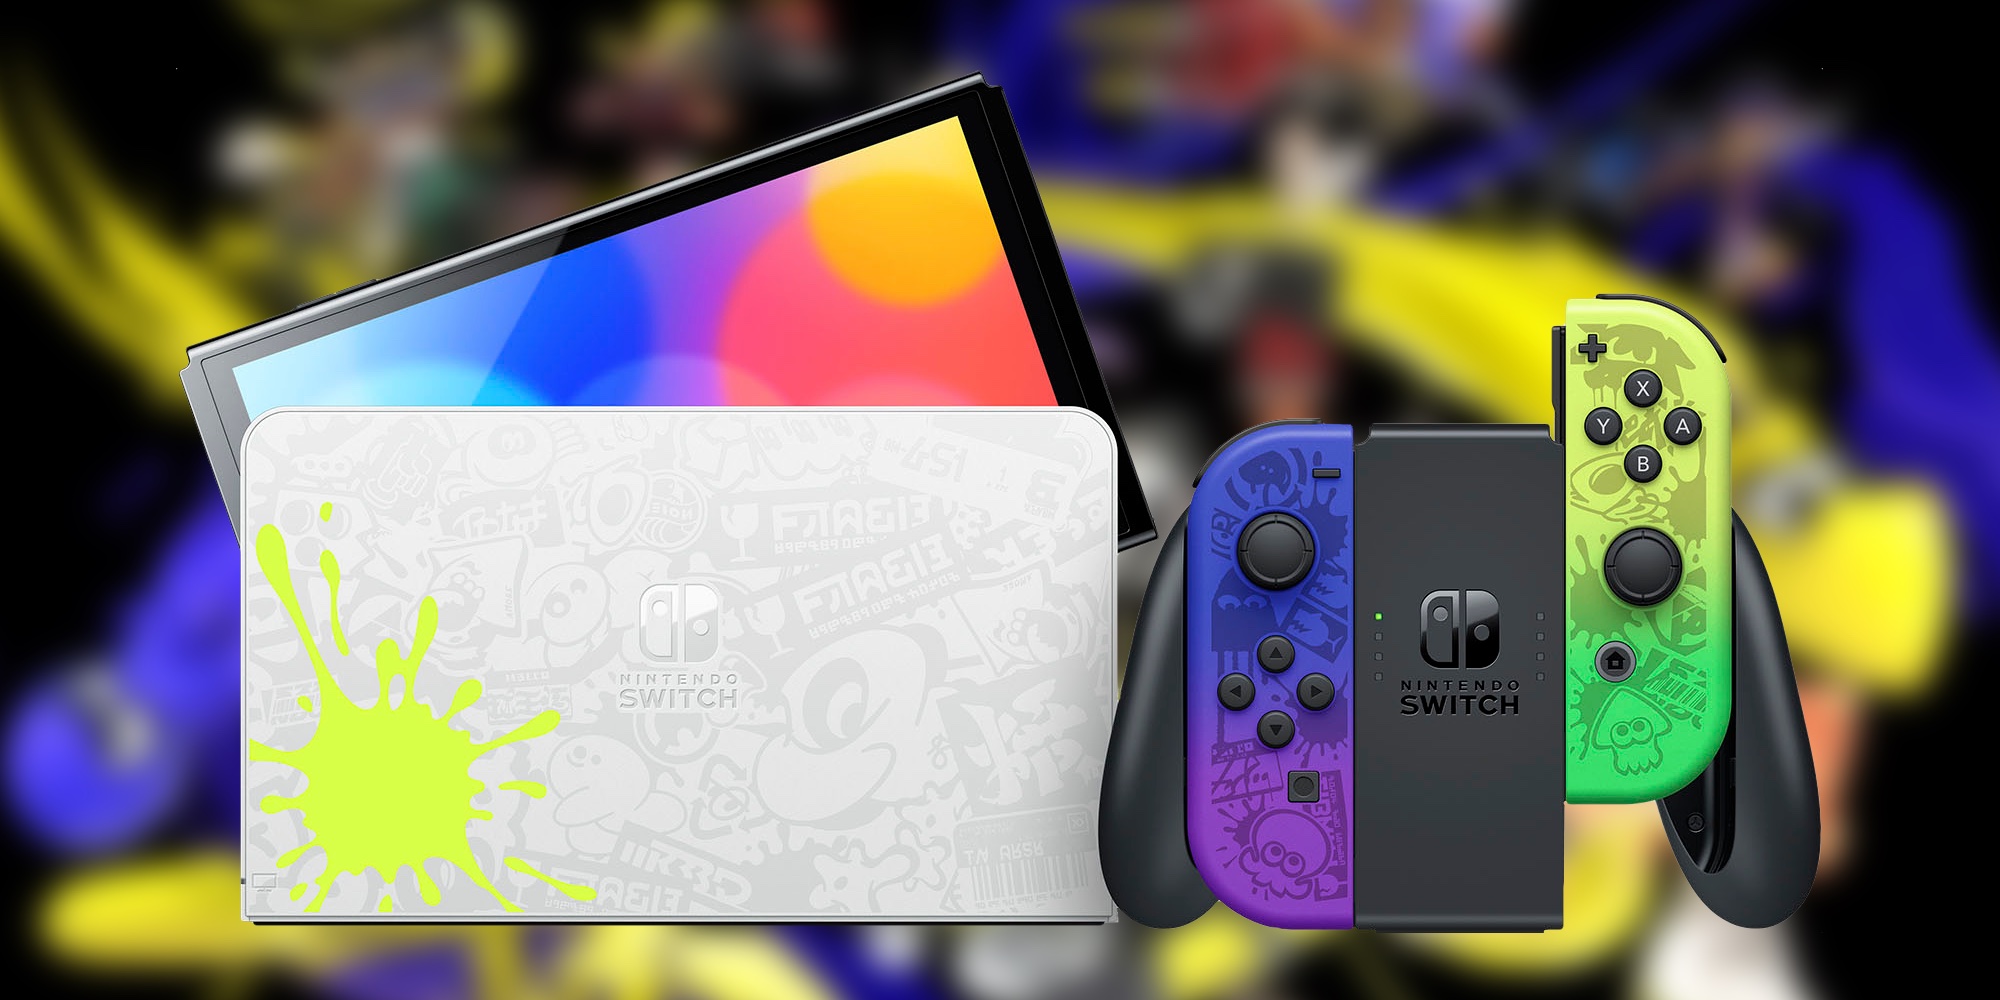 Nintendo's OLED Splatoon 3 Edition Switch now selling for 351 shipped